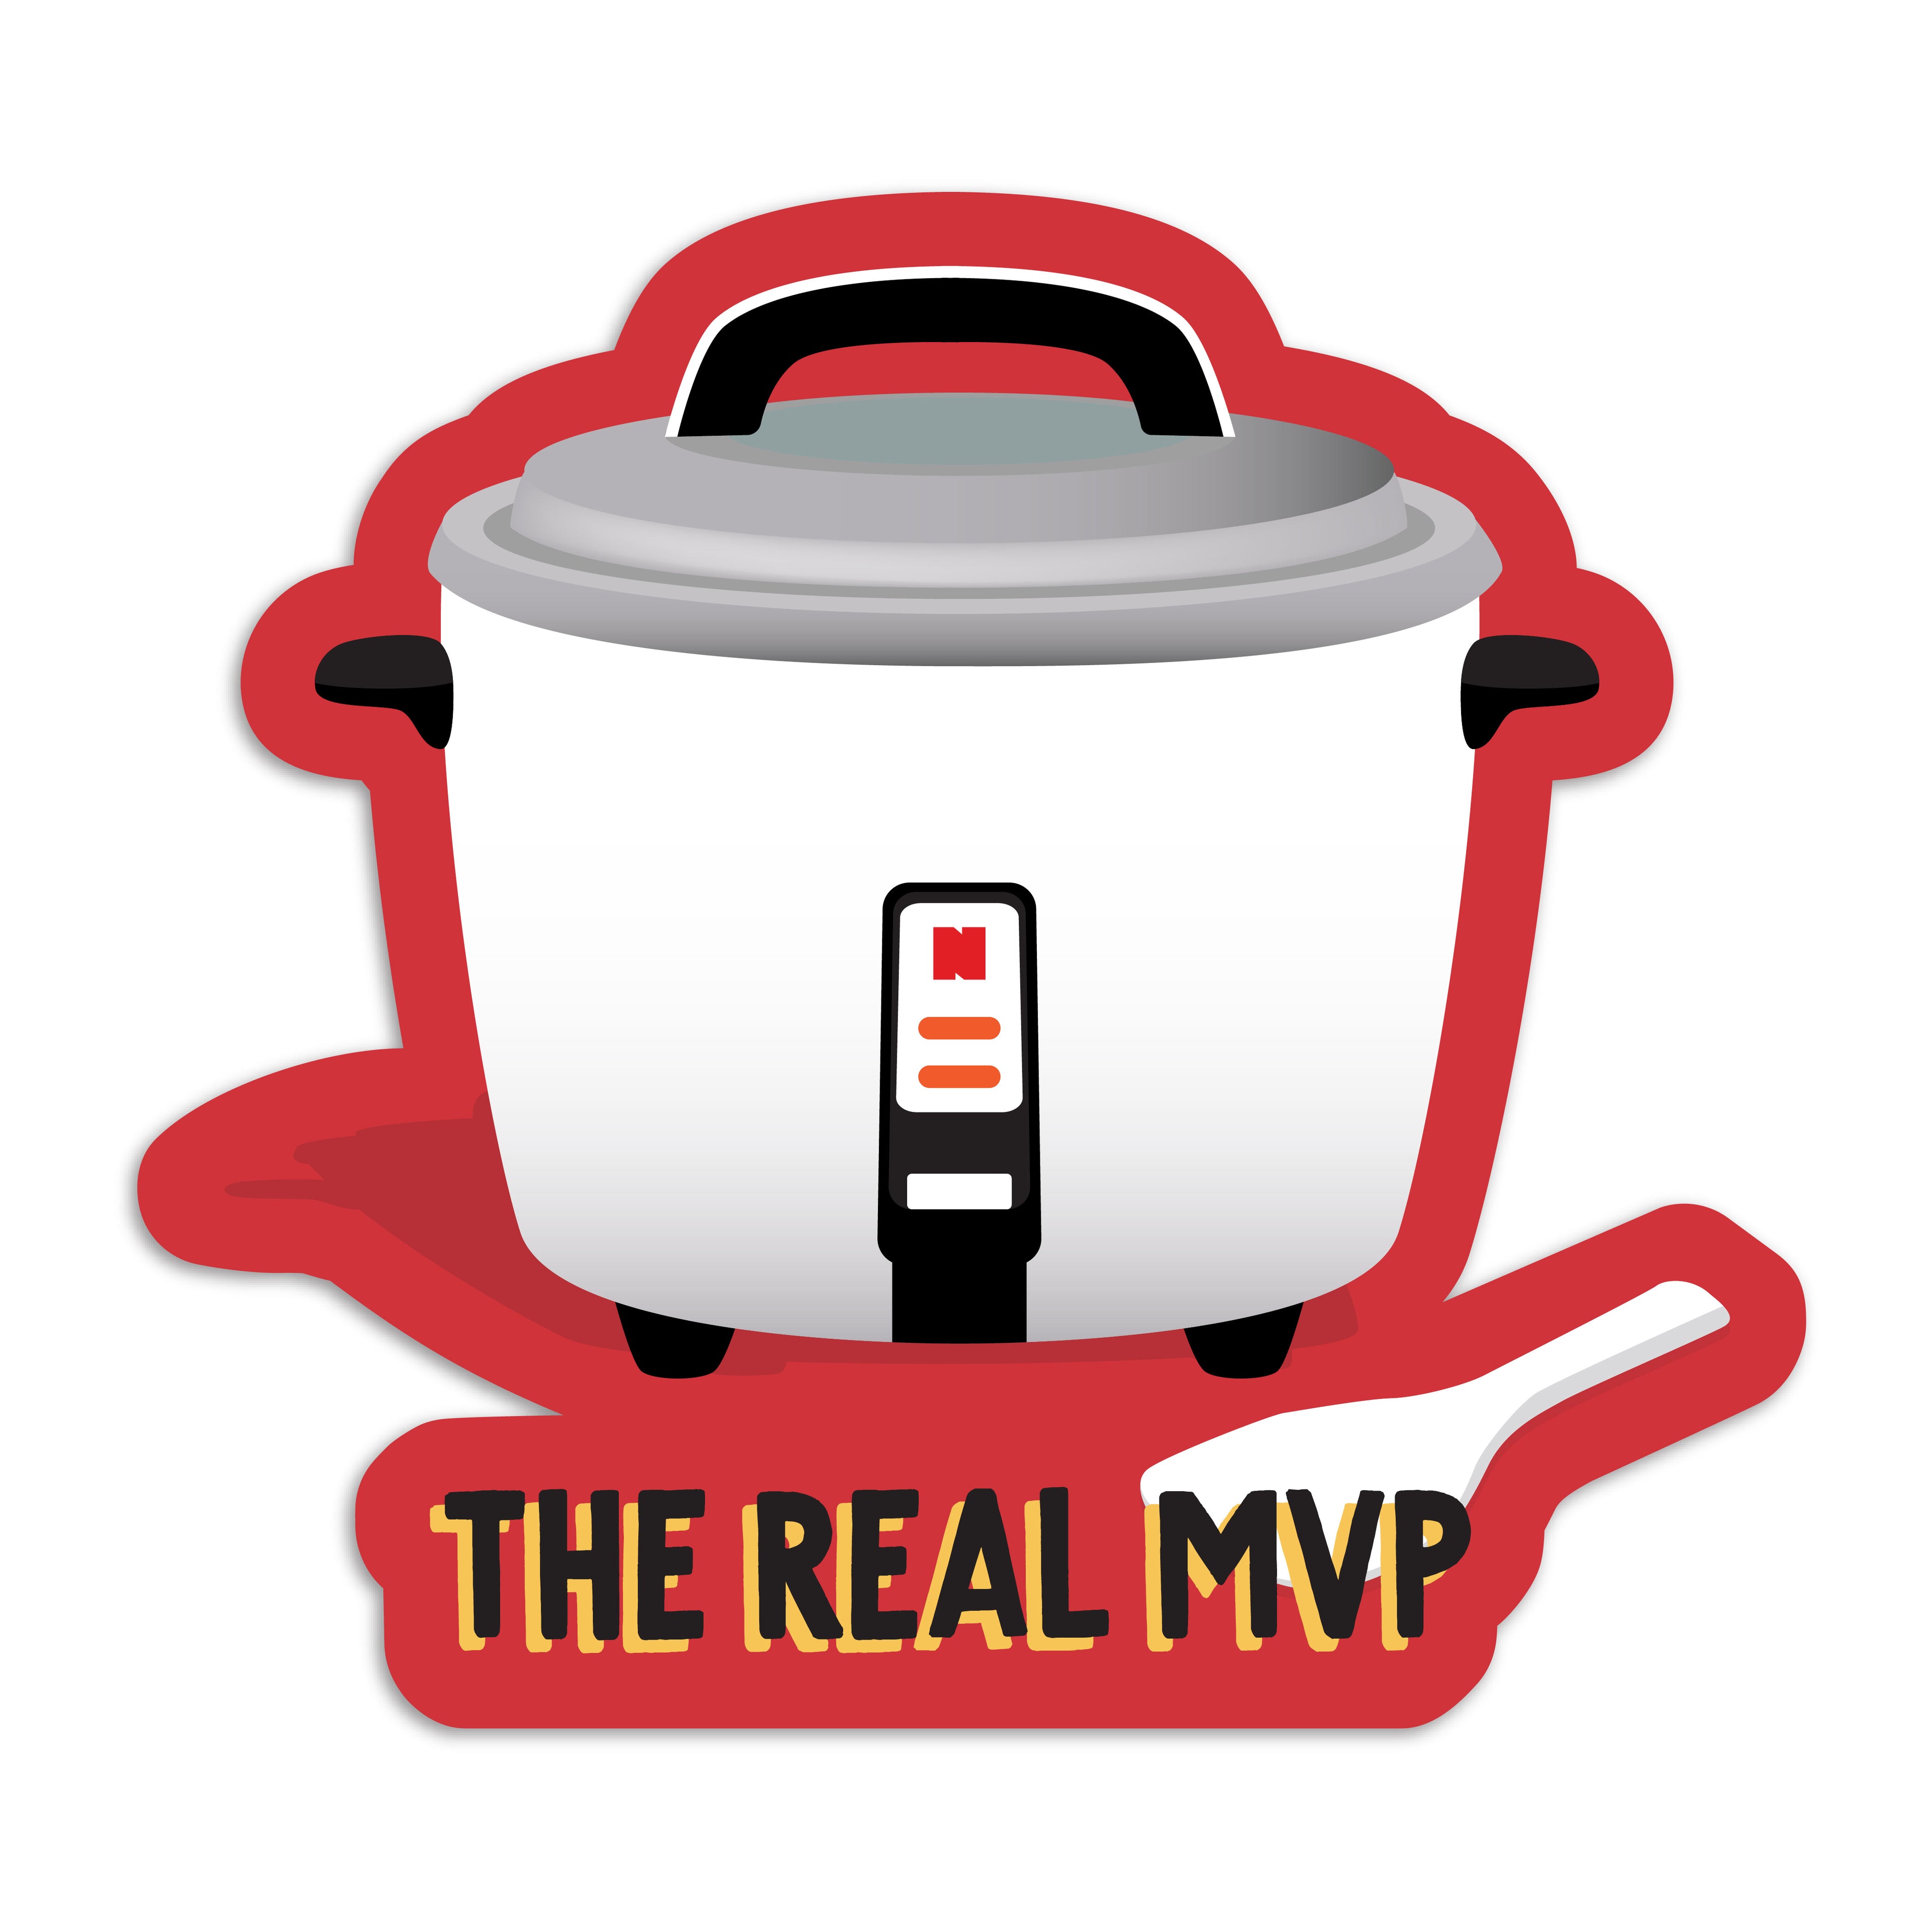 The real MVP rice cooker vinyl sticker by I&